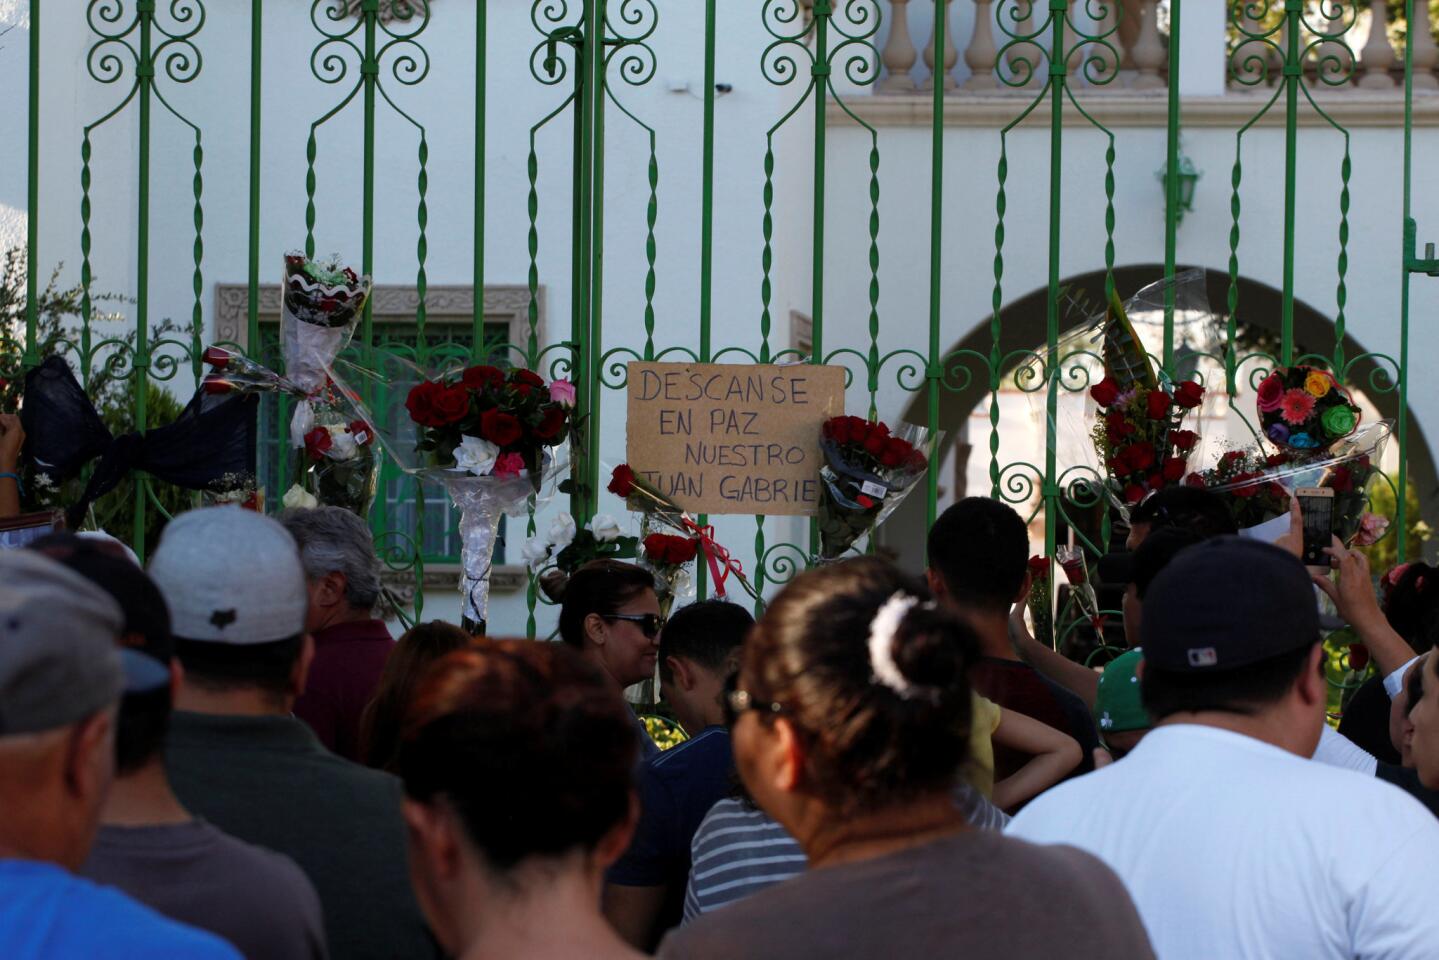 Fans place flowers on the gate outside the house of iconic Mexican singer and song writer Juan Gabriel after his death, in Ciudad Juarez